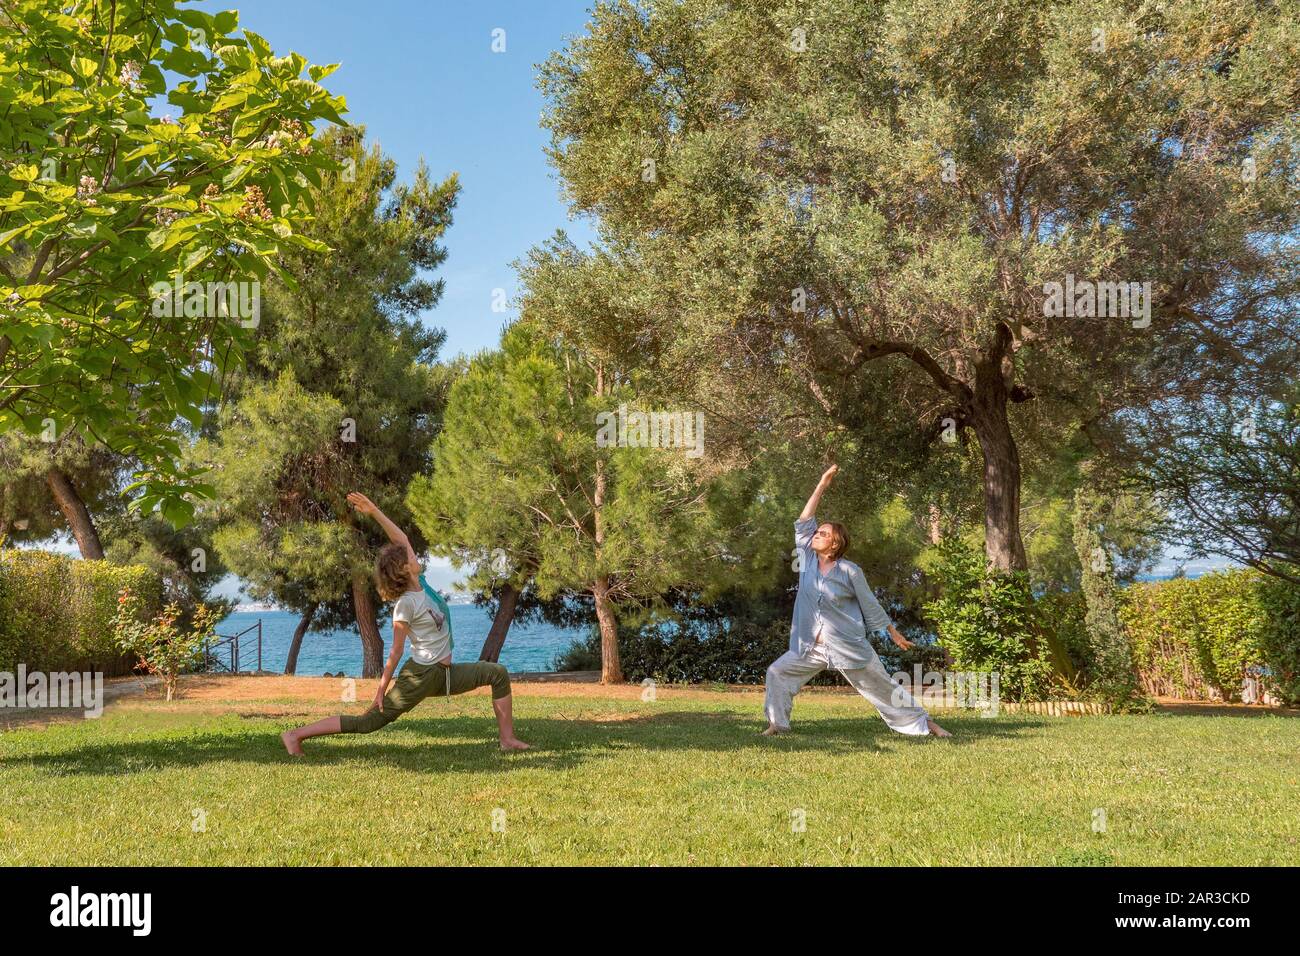 Yoga, warrior Pose. Two females doing yoga on backyard, front yard. Healthy lifestyle concept. Morning physical activities in the park, backyard. Happy women care about their bodies. Stock Photo